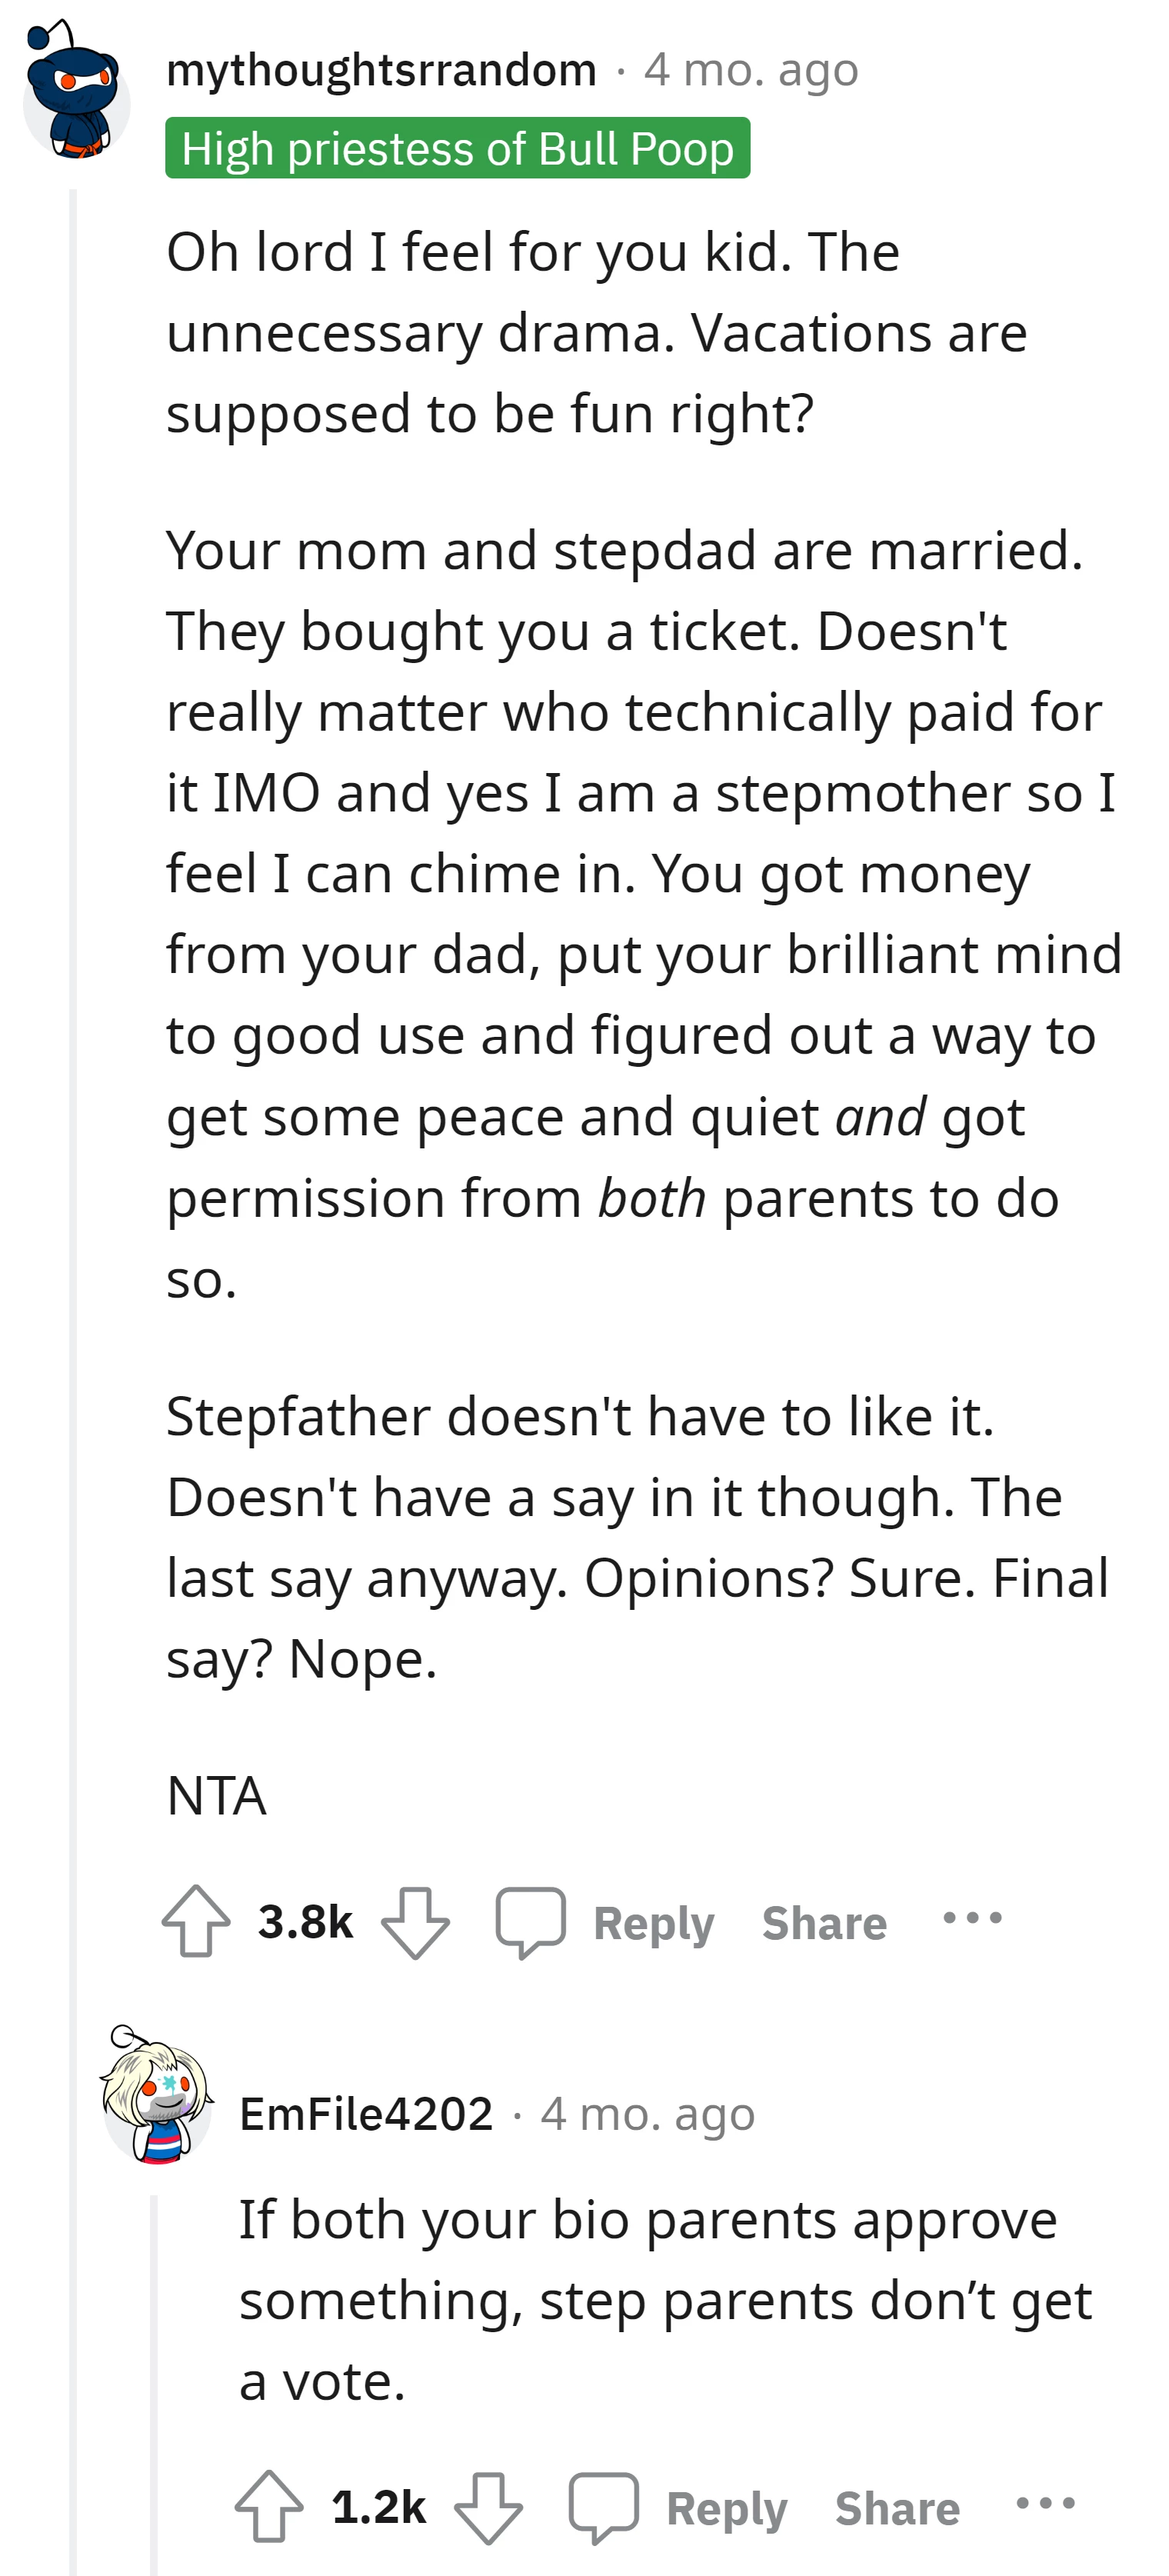 both parents gave permission and the stepfather's opinion shouldn't have the final say